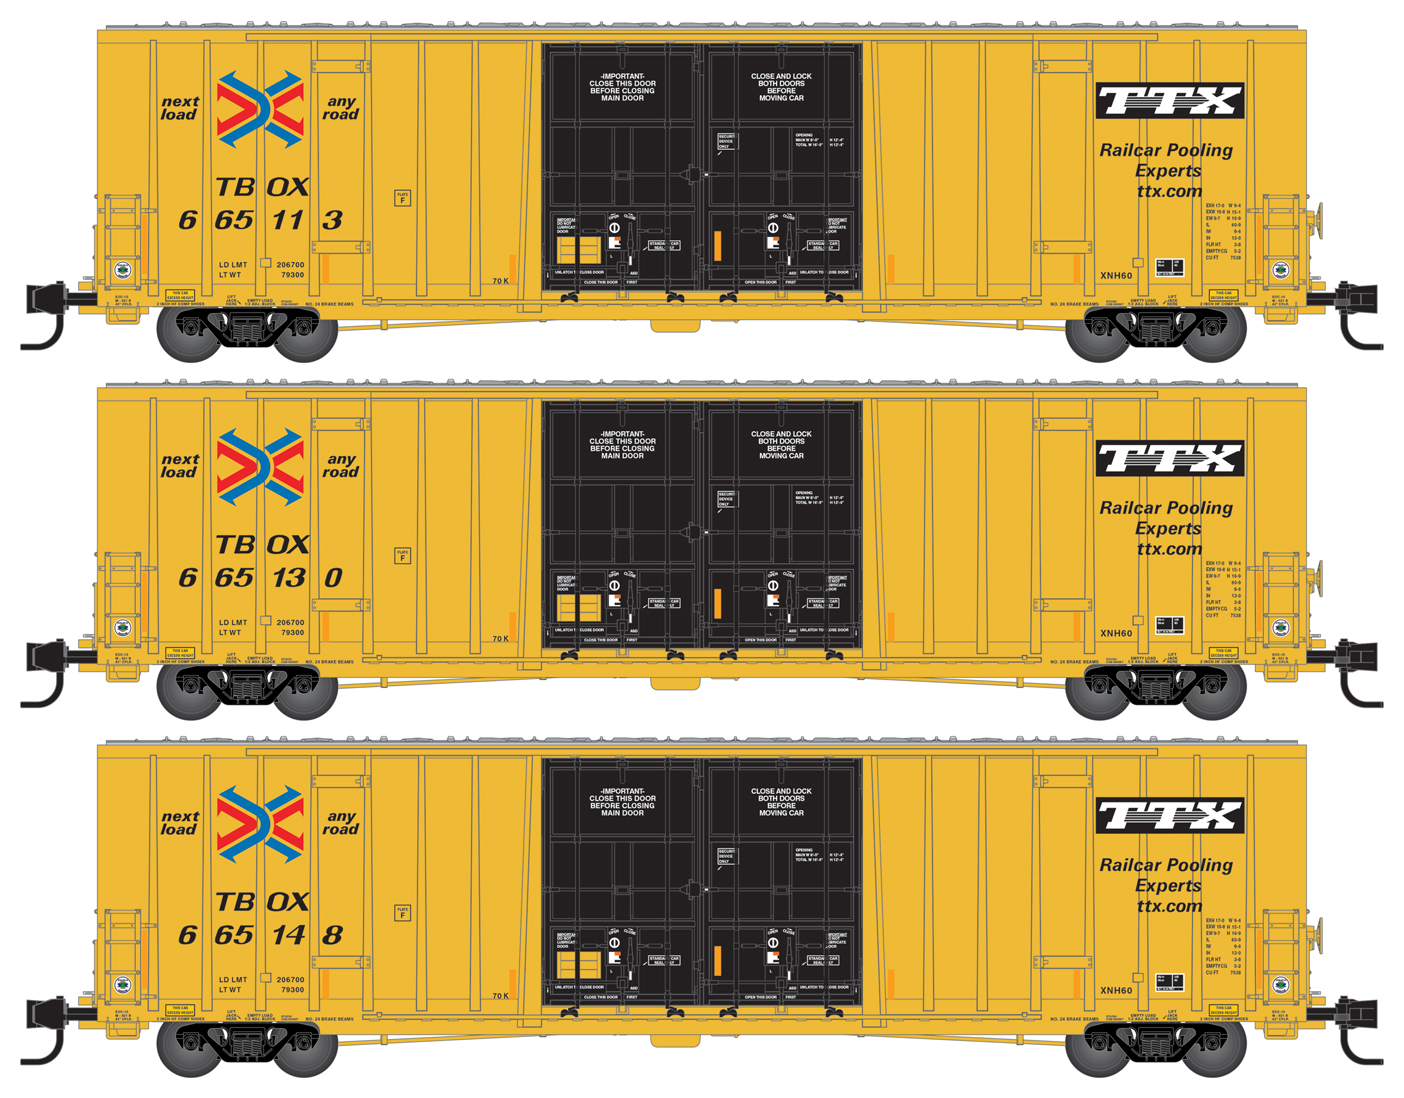 Micro-Trains 02544014-50ft Boxcar Railbox 'Day of the Cowboy' N Scale